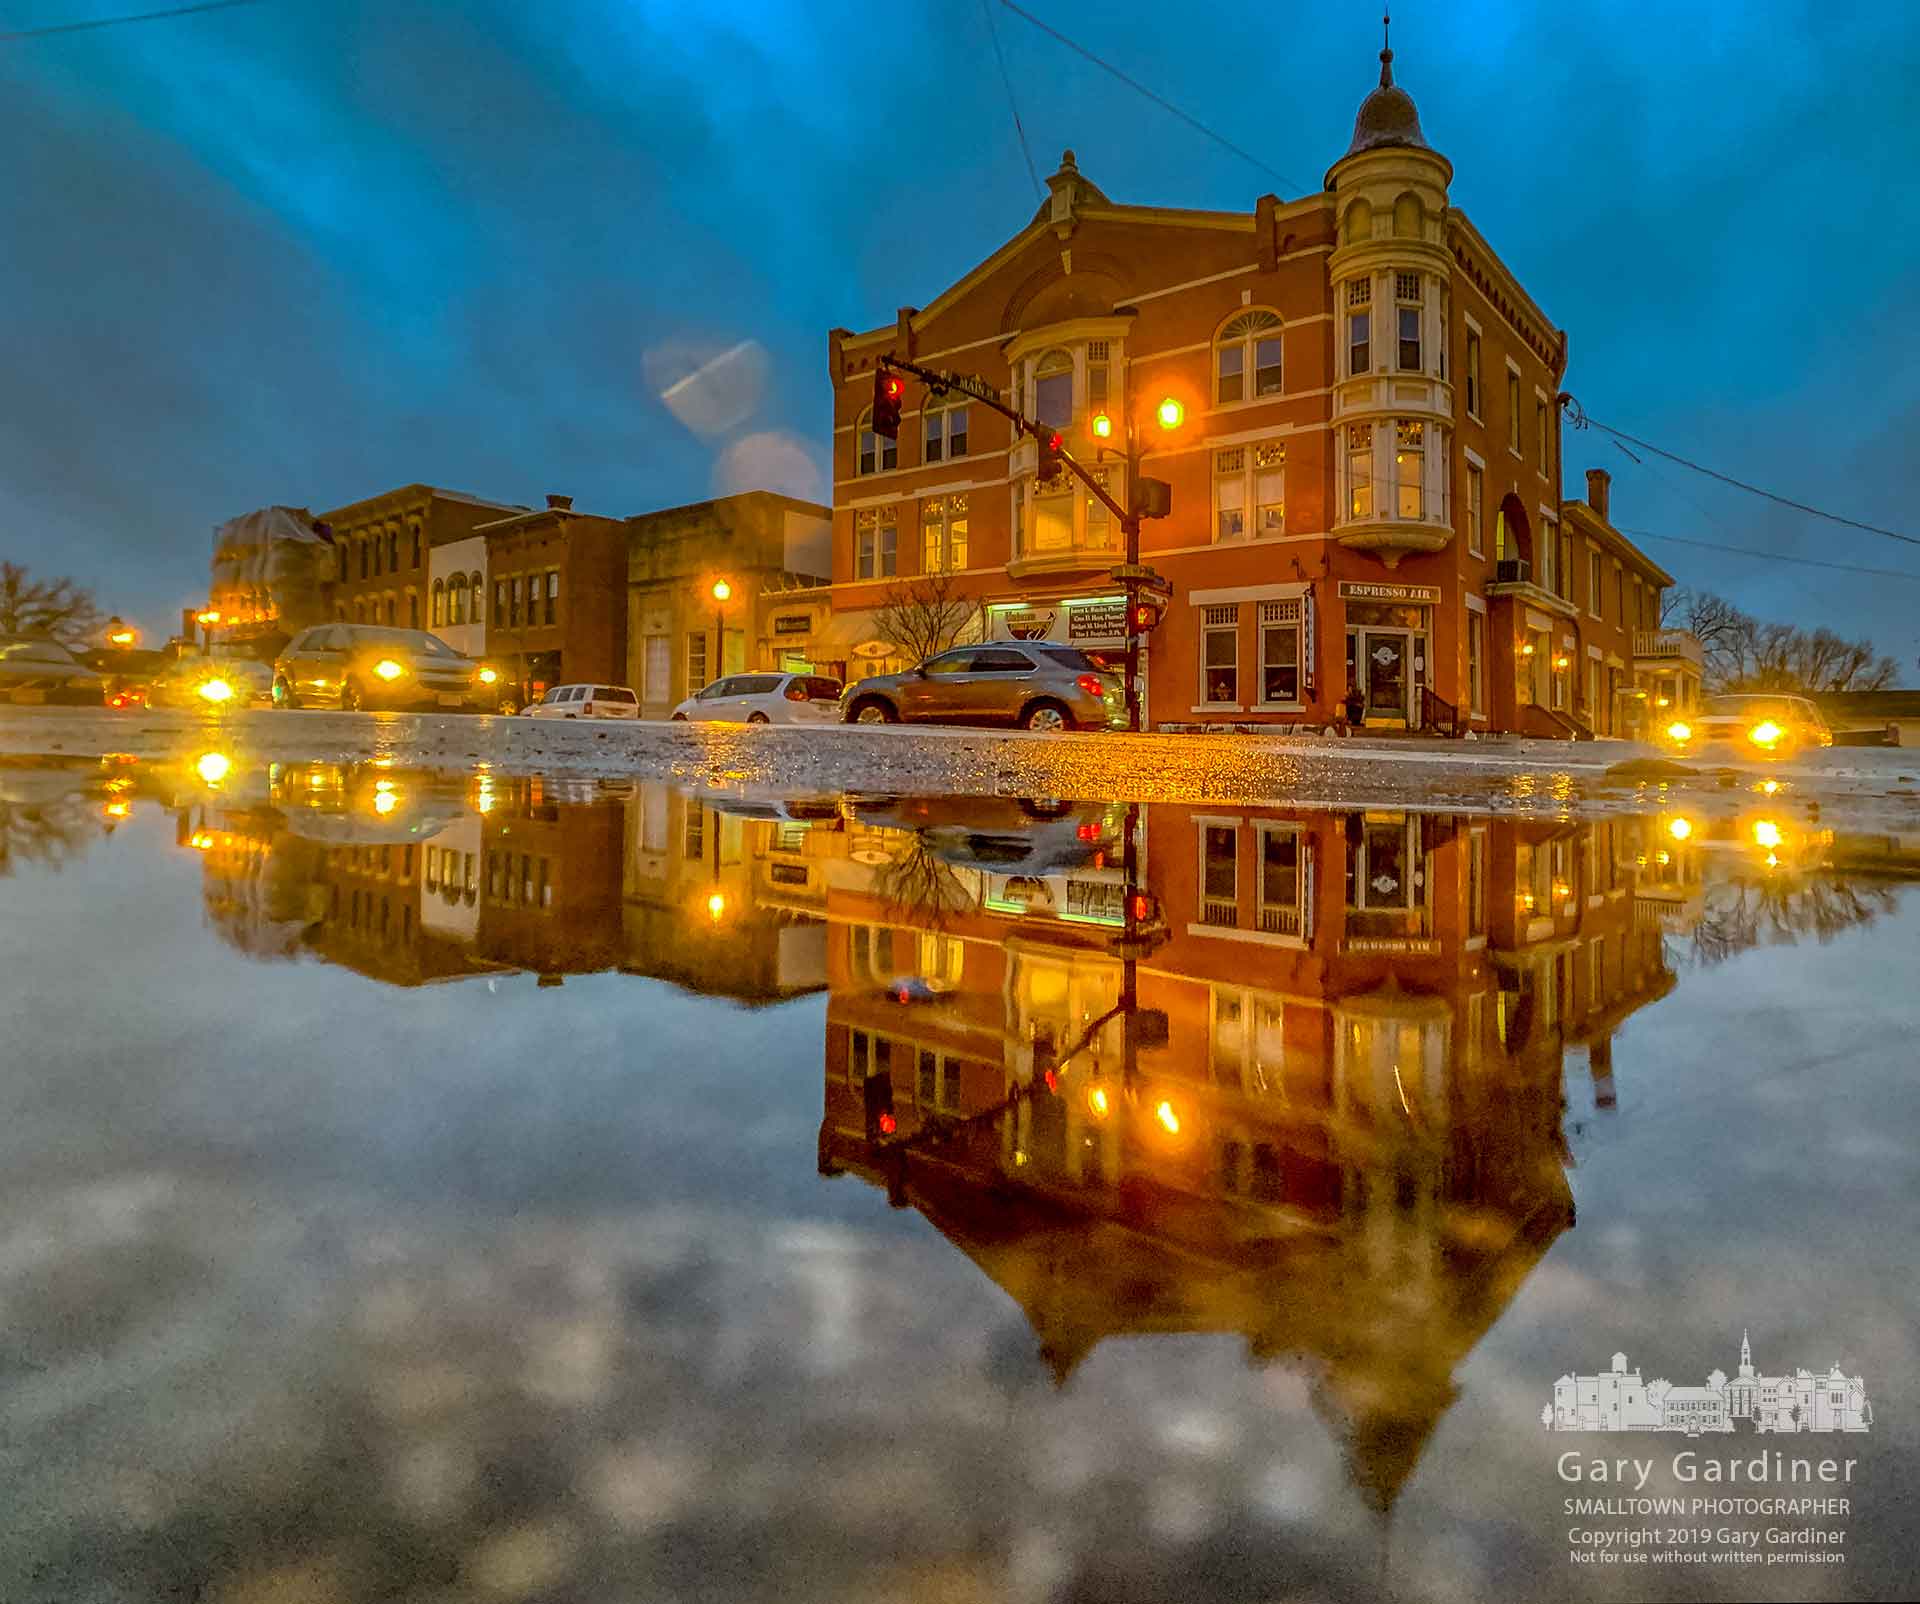 The Holmes Hotel in Uptown Westerville is reflected in puddles gathering in the street after a day of rain melted most of the snow and added to the gathering groundwater. My Final Photo for Jan. 23, 2019.